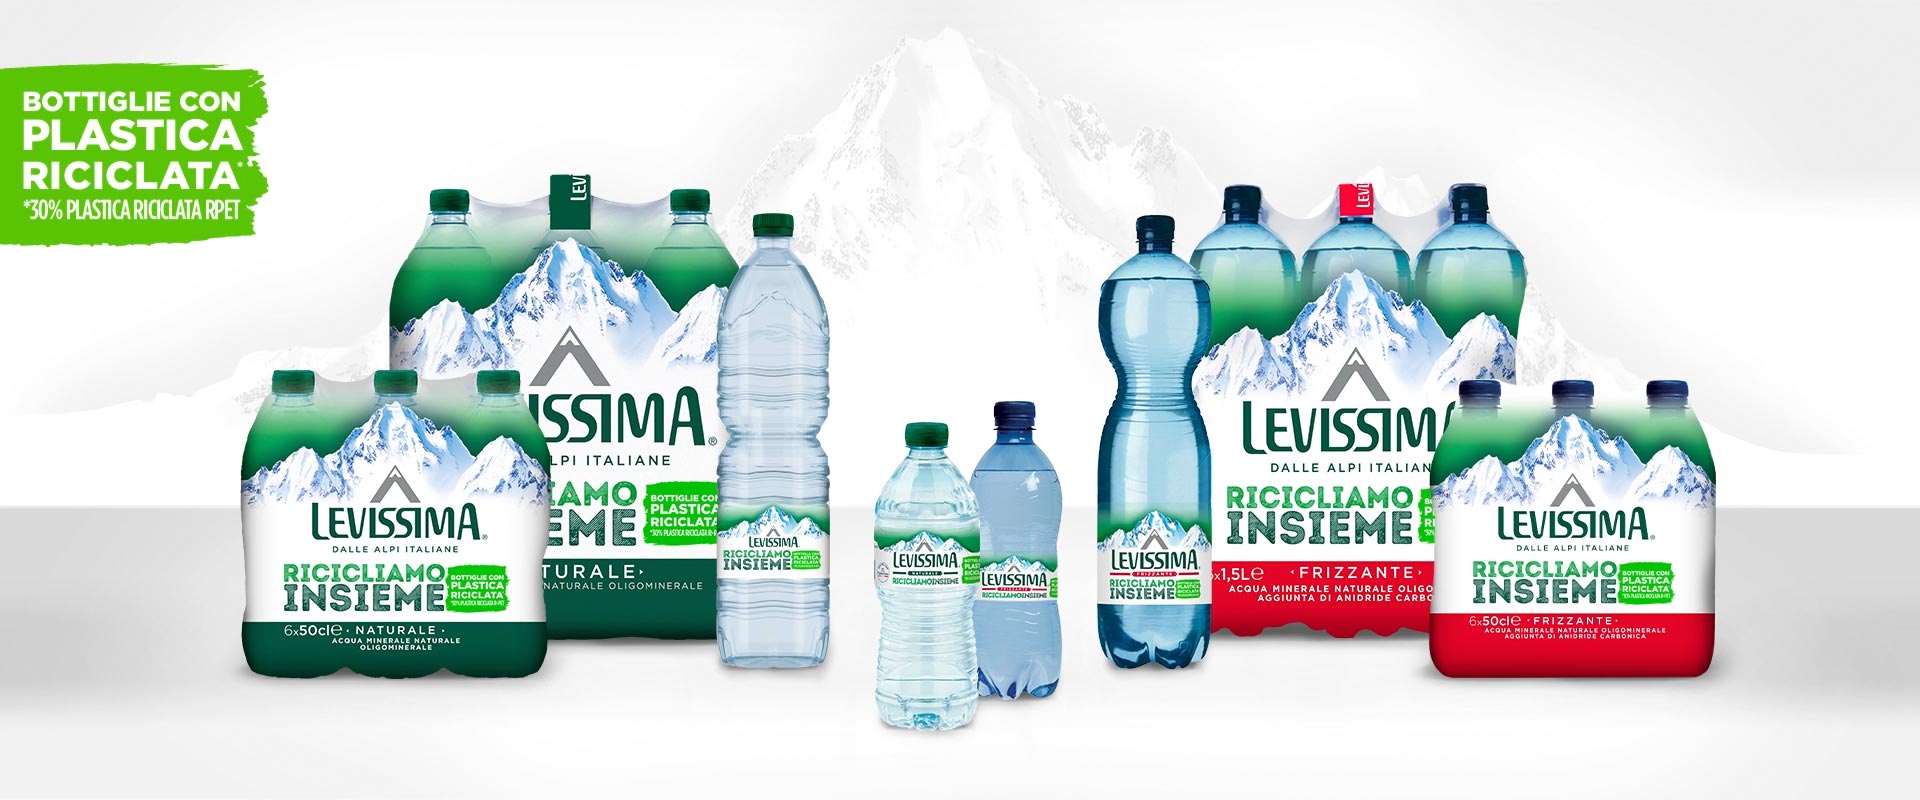 “Let's Recycle Together”, Levissima call to action